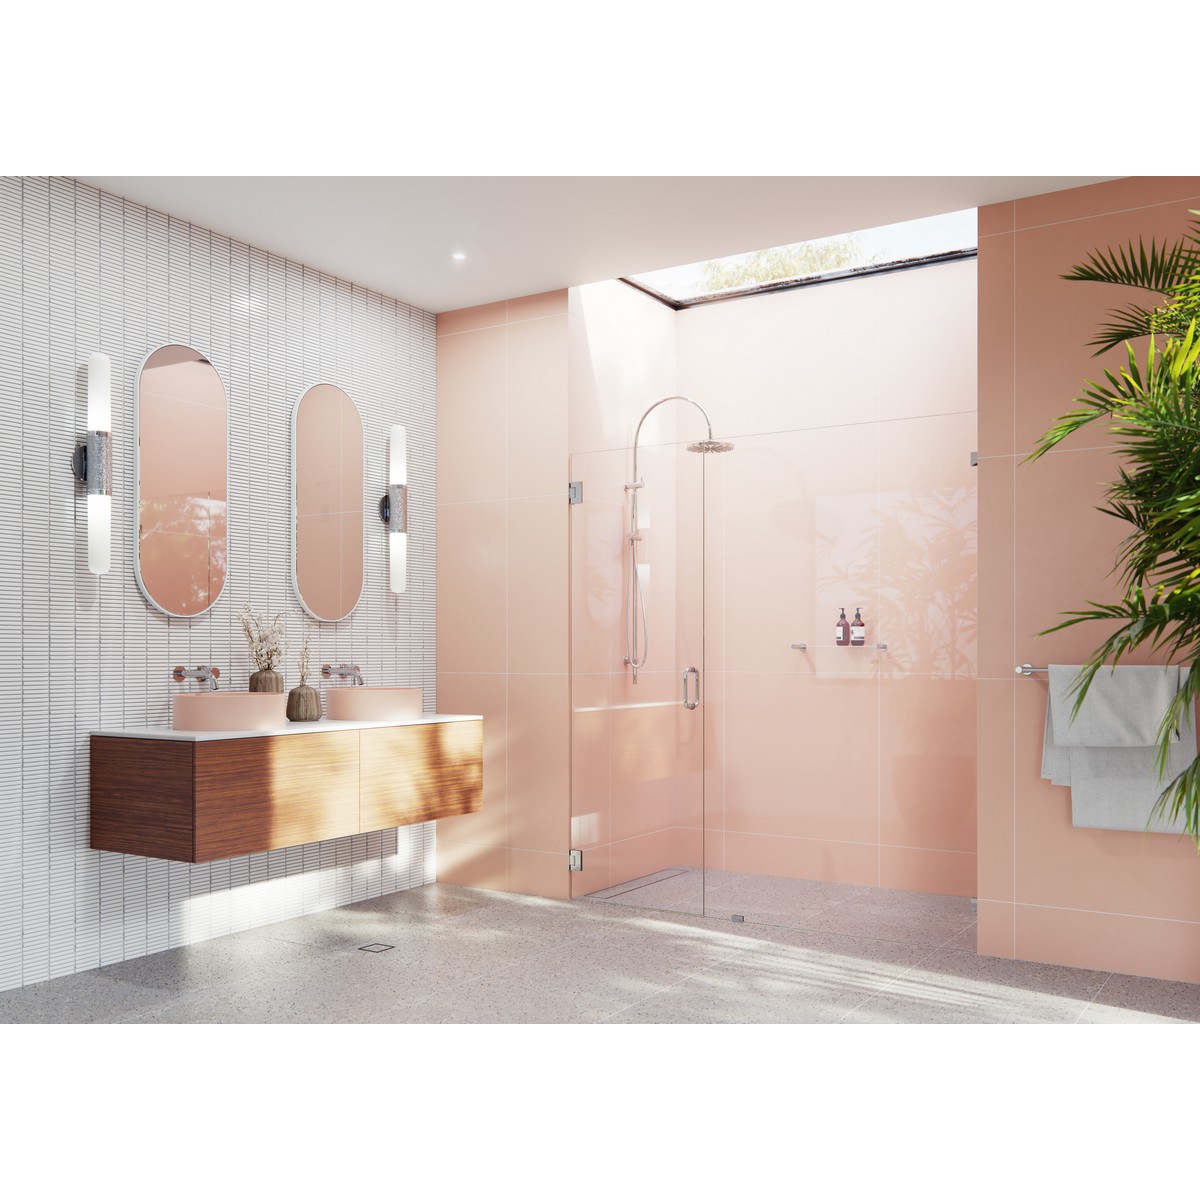 GLASS WAREHOUSE GW-WH-68 ILLUME 68 W X 78 H WALL HINGED FULLY FRAMELESS GLASS SHOWER ENCLOSURE